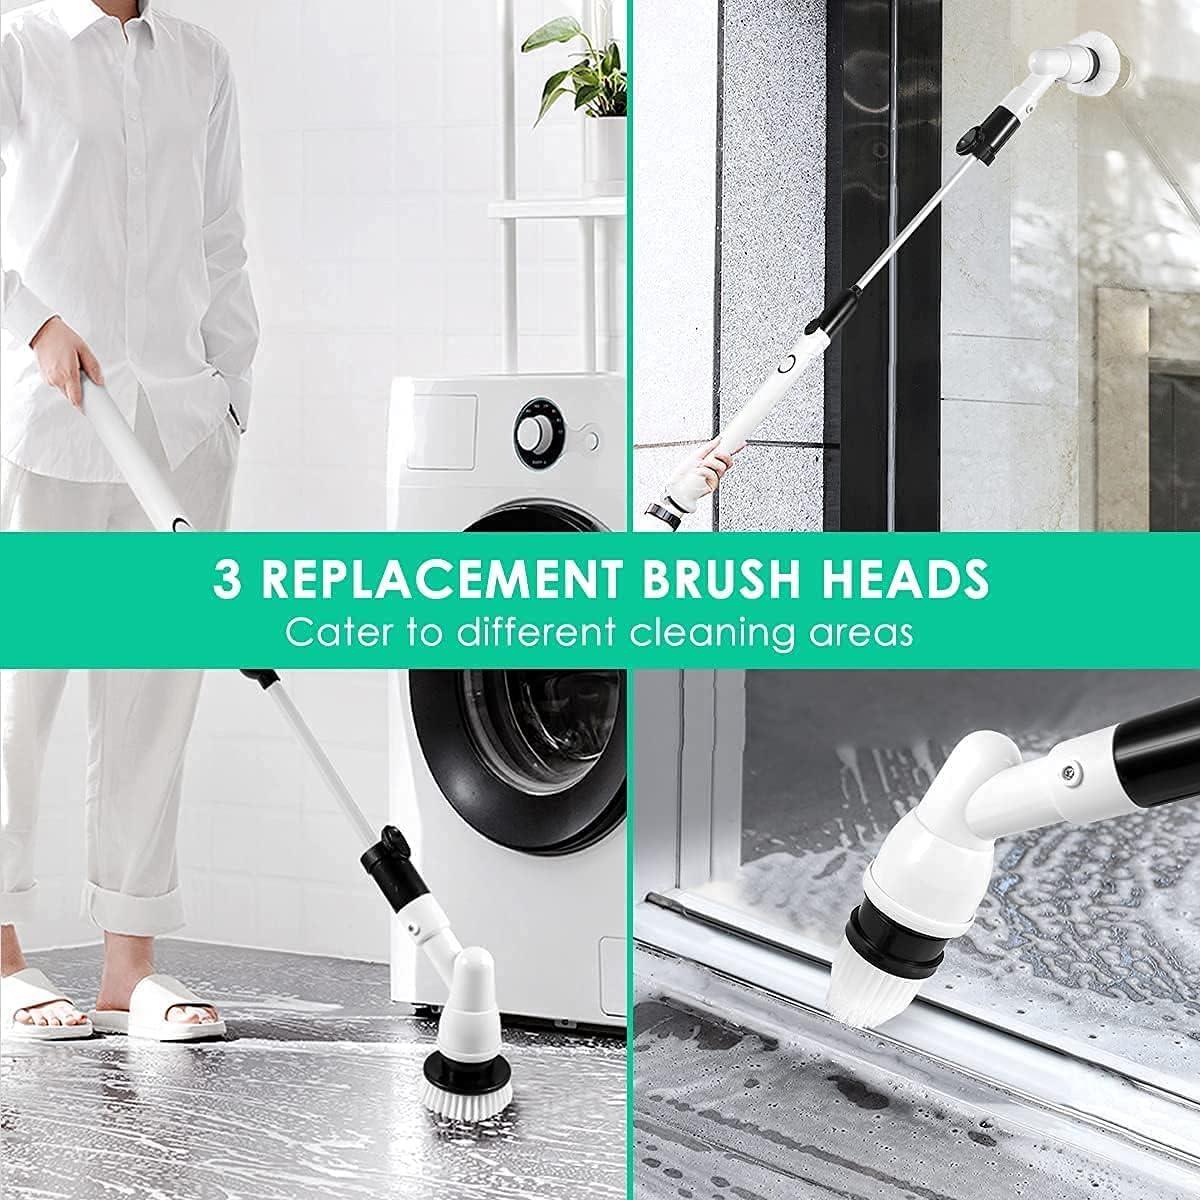 GOFOIT Spin Scrubber 360-degree Cordless Electric Rotary Scrubber Power  Scrubber with Long Handle and Cordless Shower Tub and Tile Scrubber  Equipped with 3 Multi-Purpose Cleaning Brush Heads